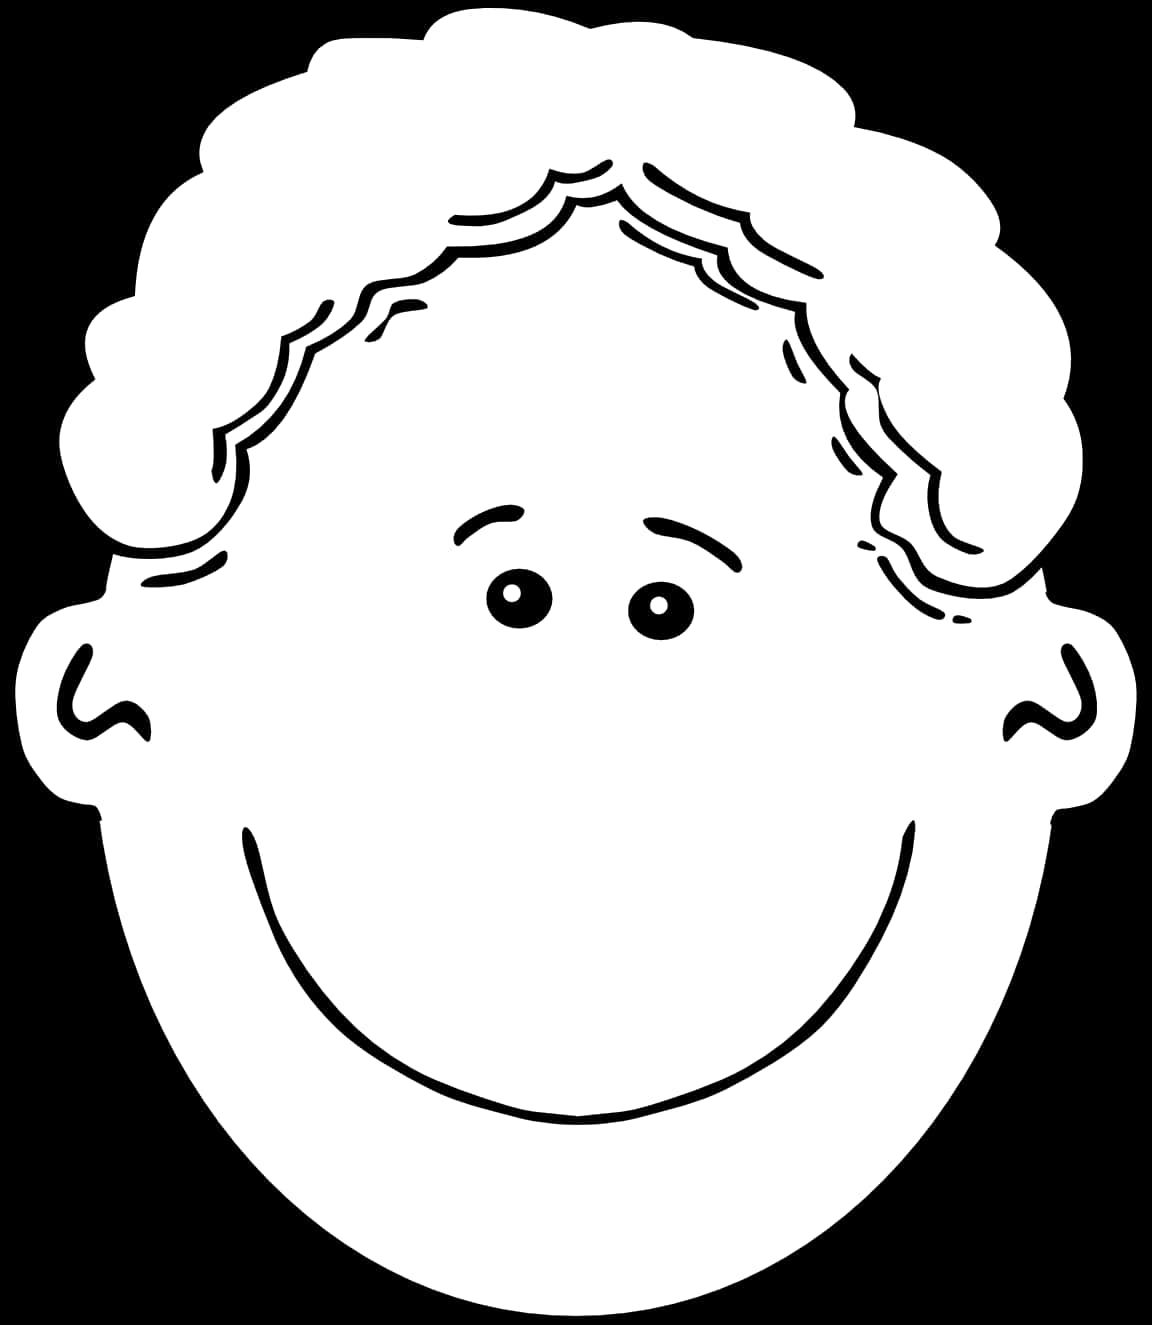 Smiling Cartoon Face Outline PNG